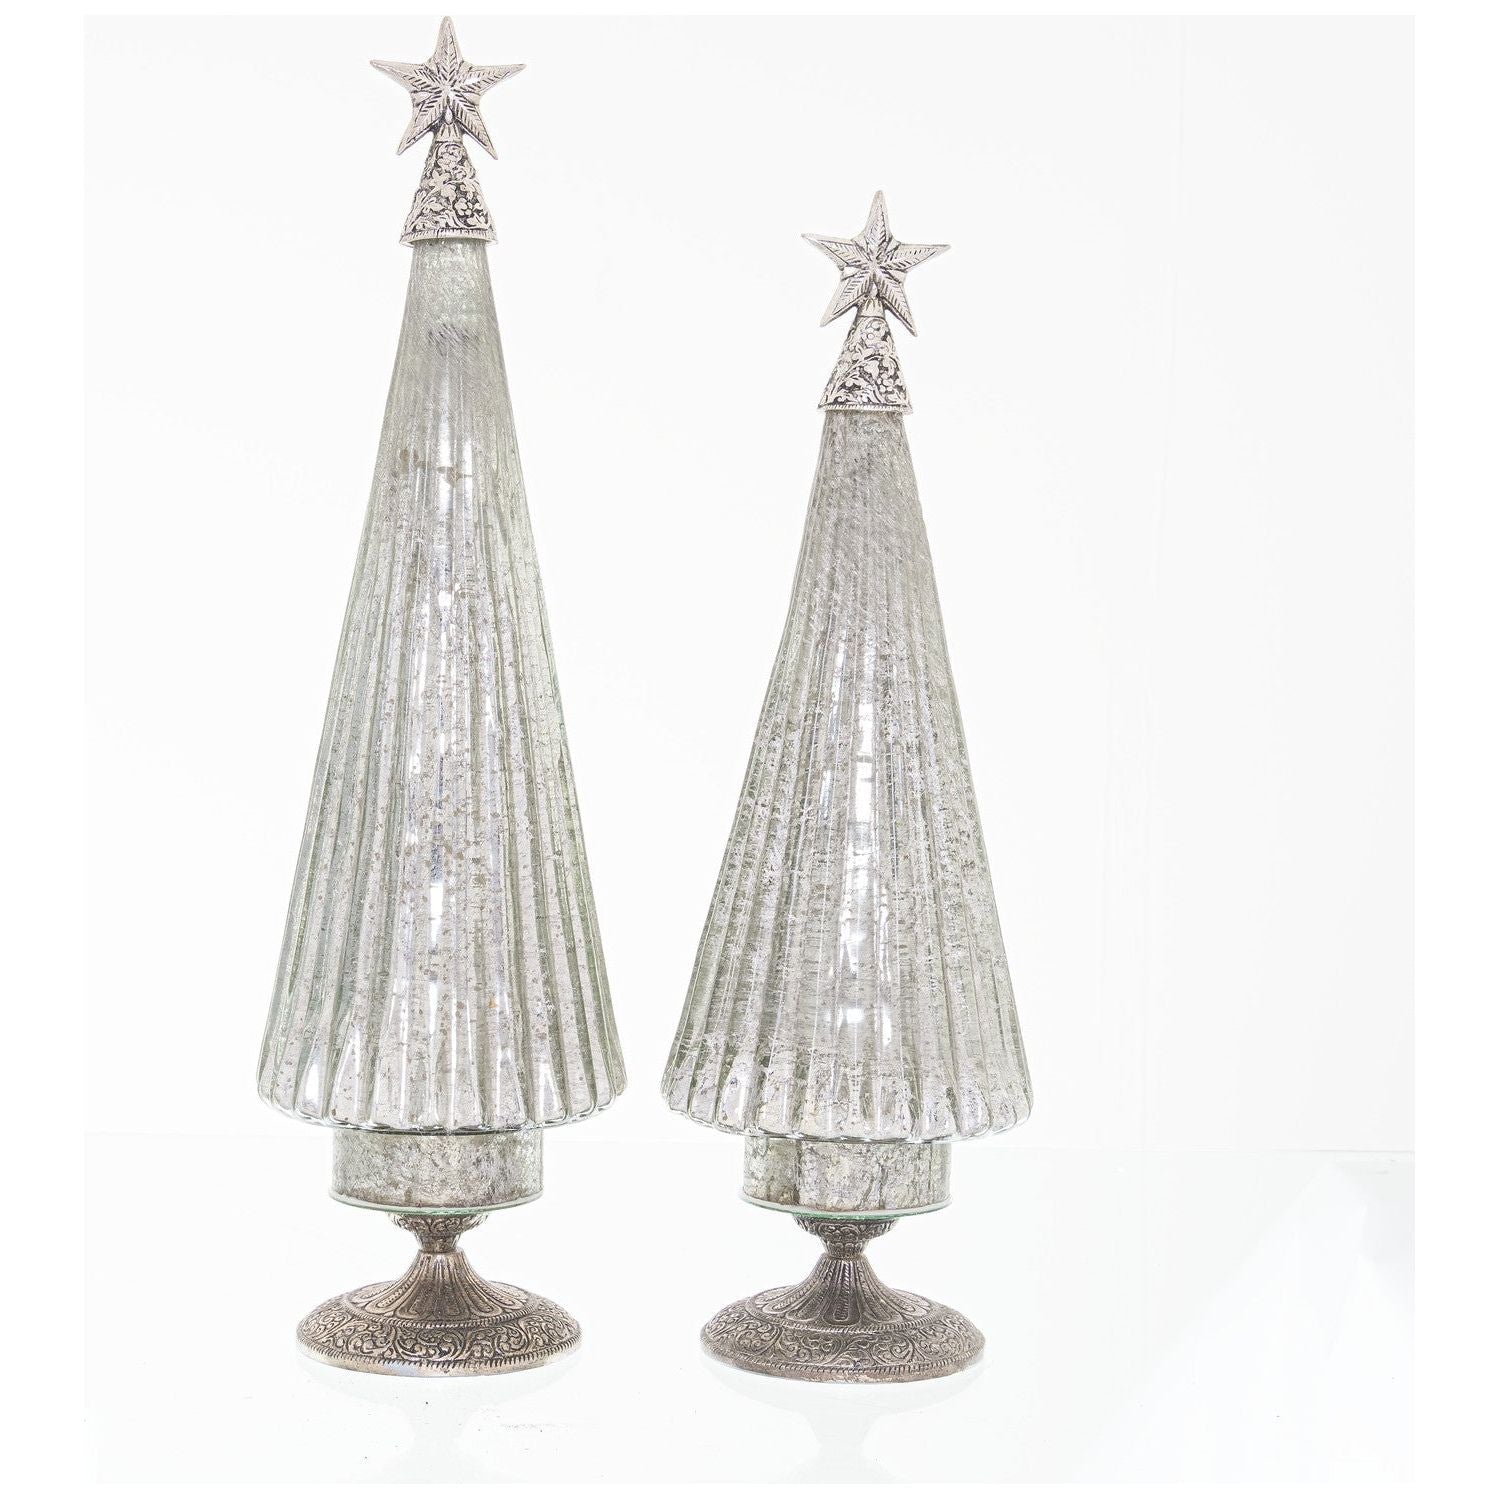 The Noel Collection Footed Glass Decorative Tree - Ashton and Finch